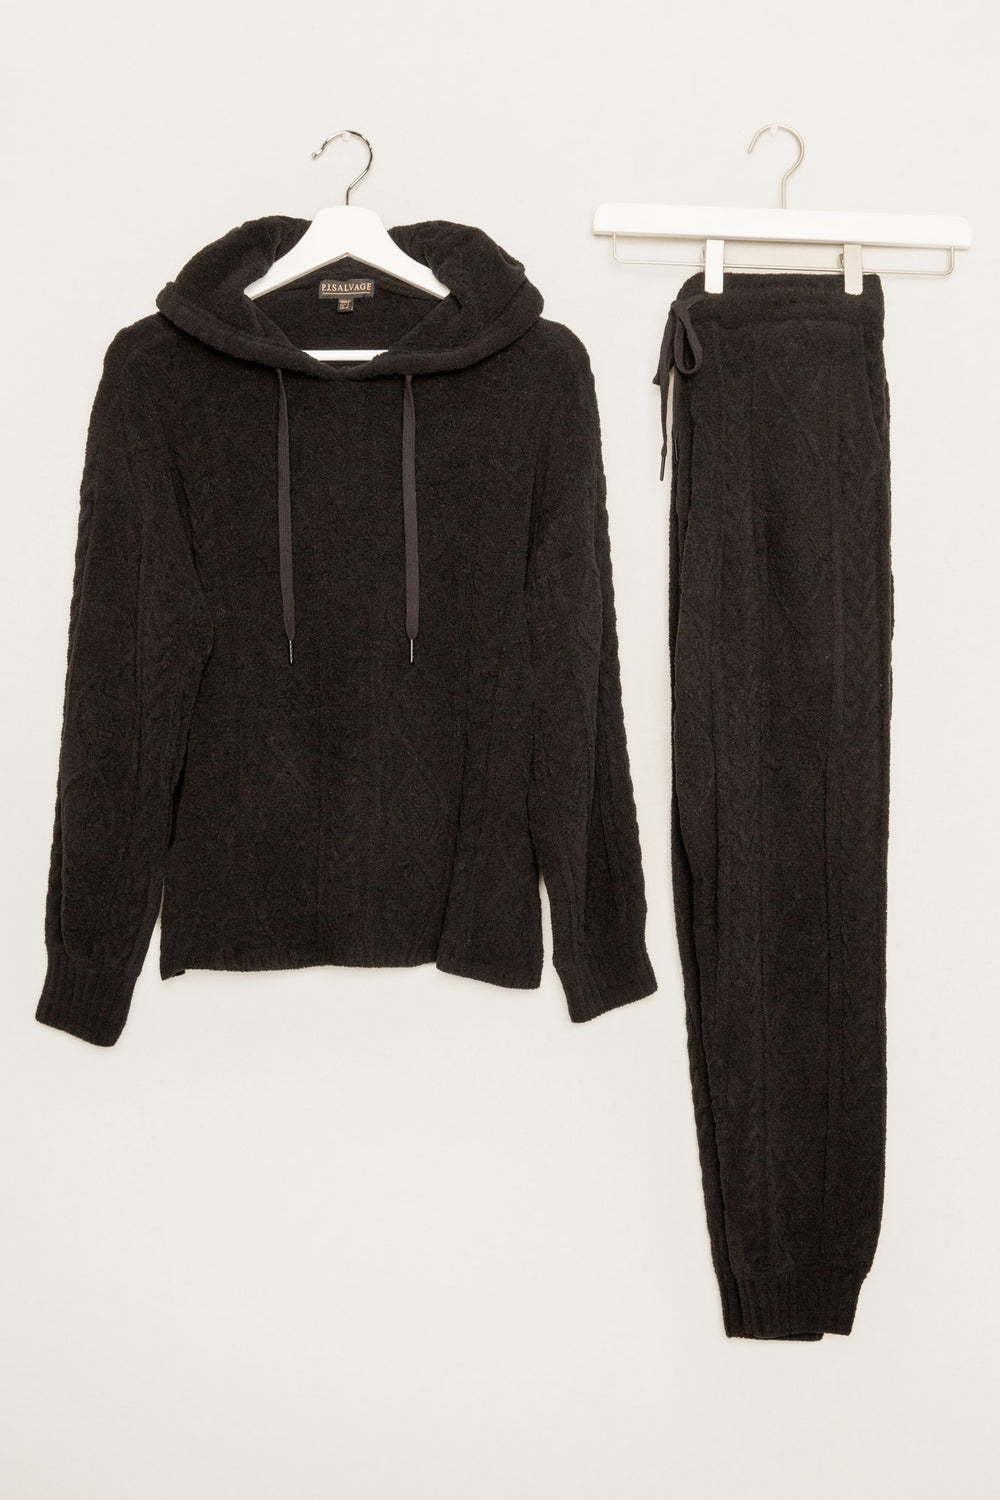 Matching jogger sweater set in black cable-textured chenille. Hooded top & jogger pant with pockets. (7231866273892)